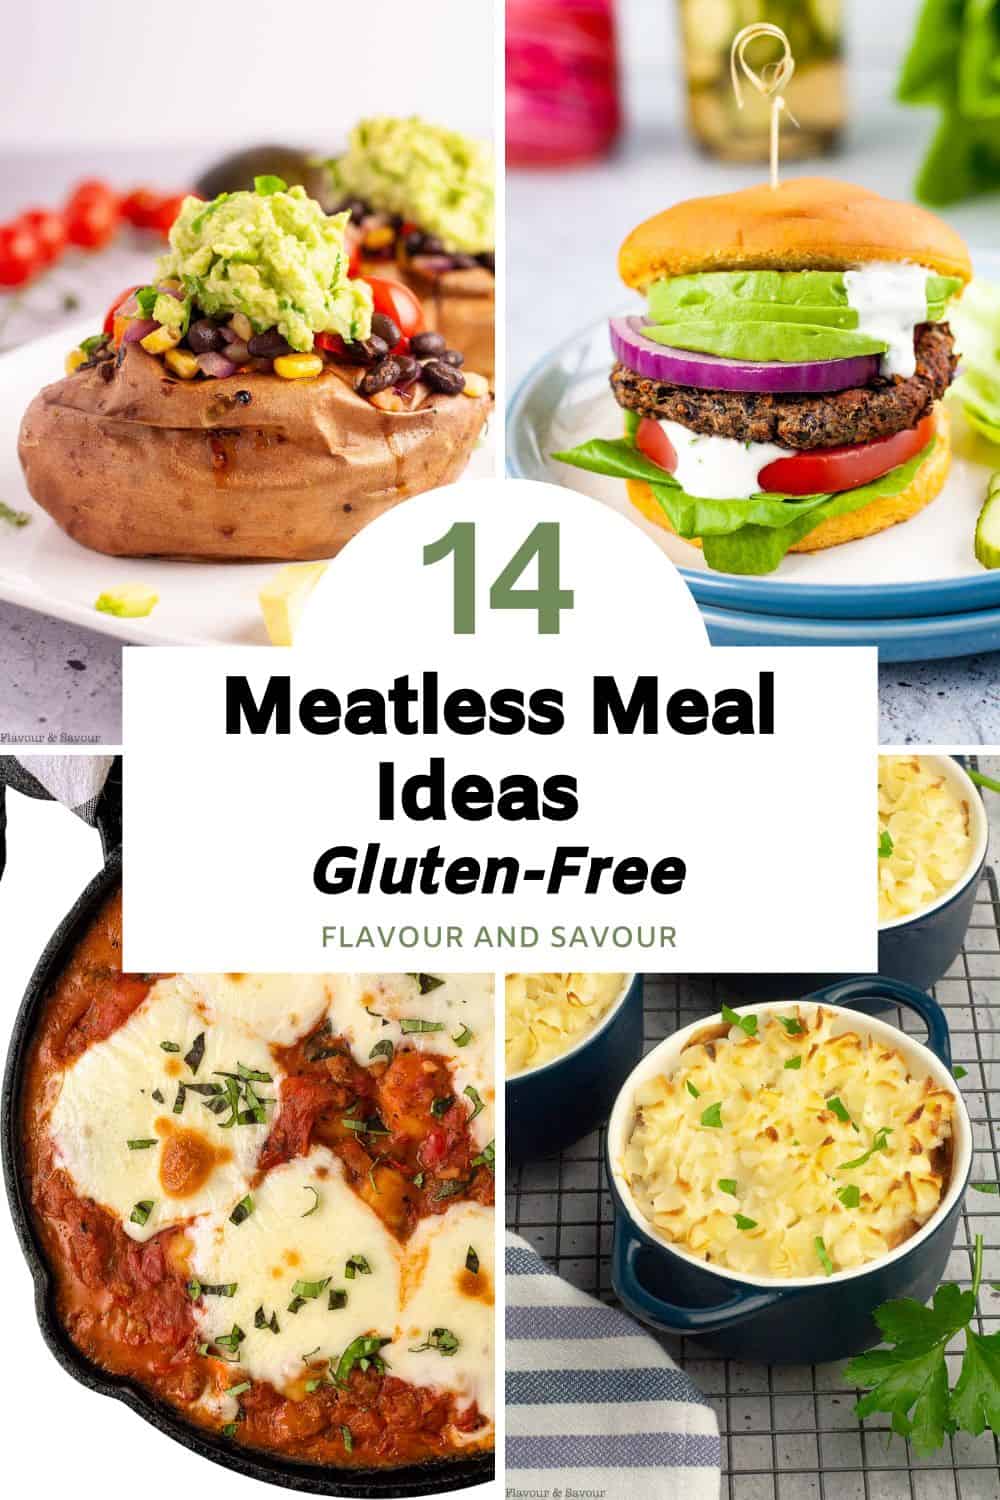 Collage image with text overlay for 14 meatless meal ideas.